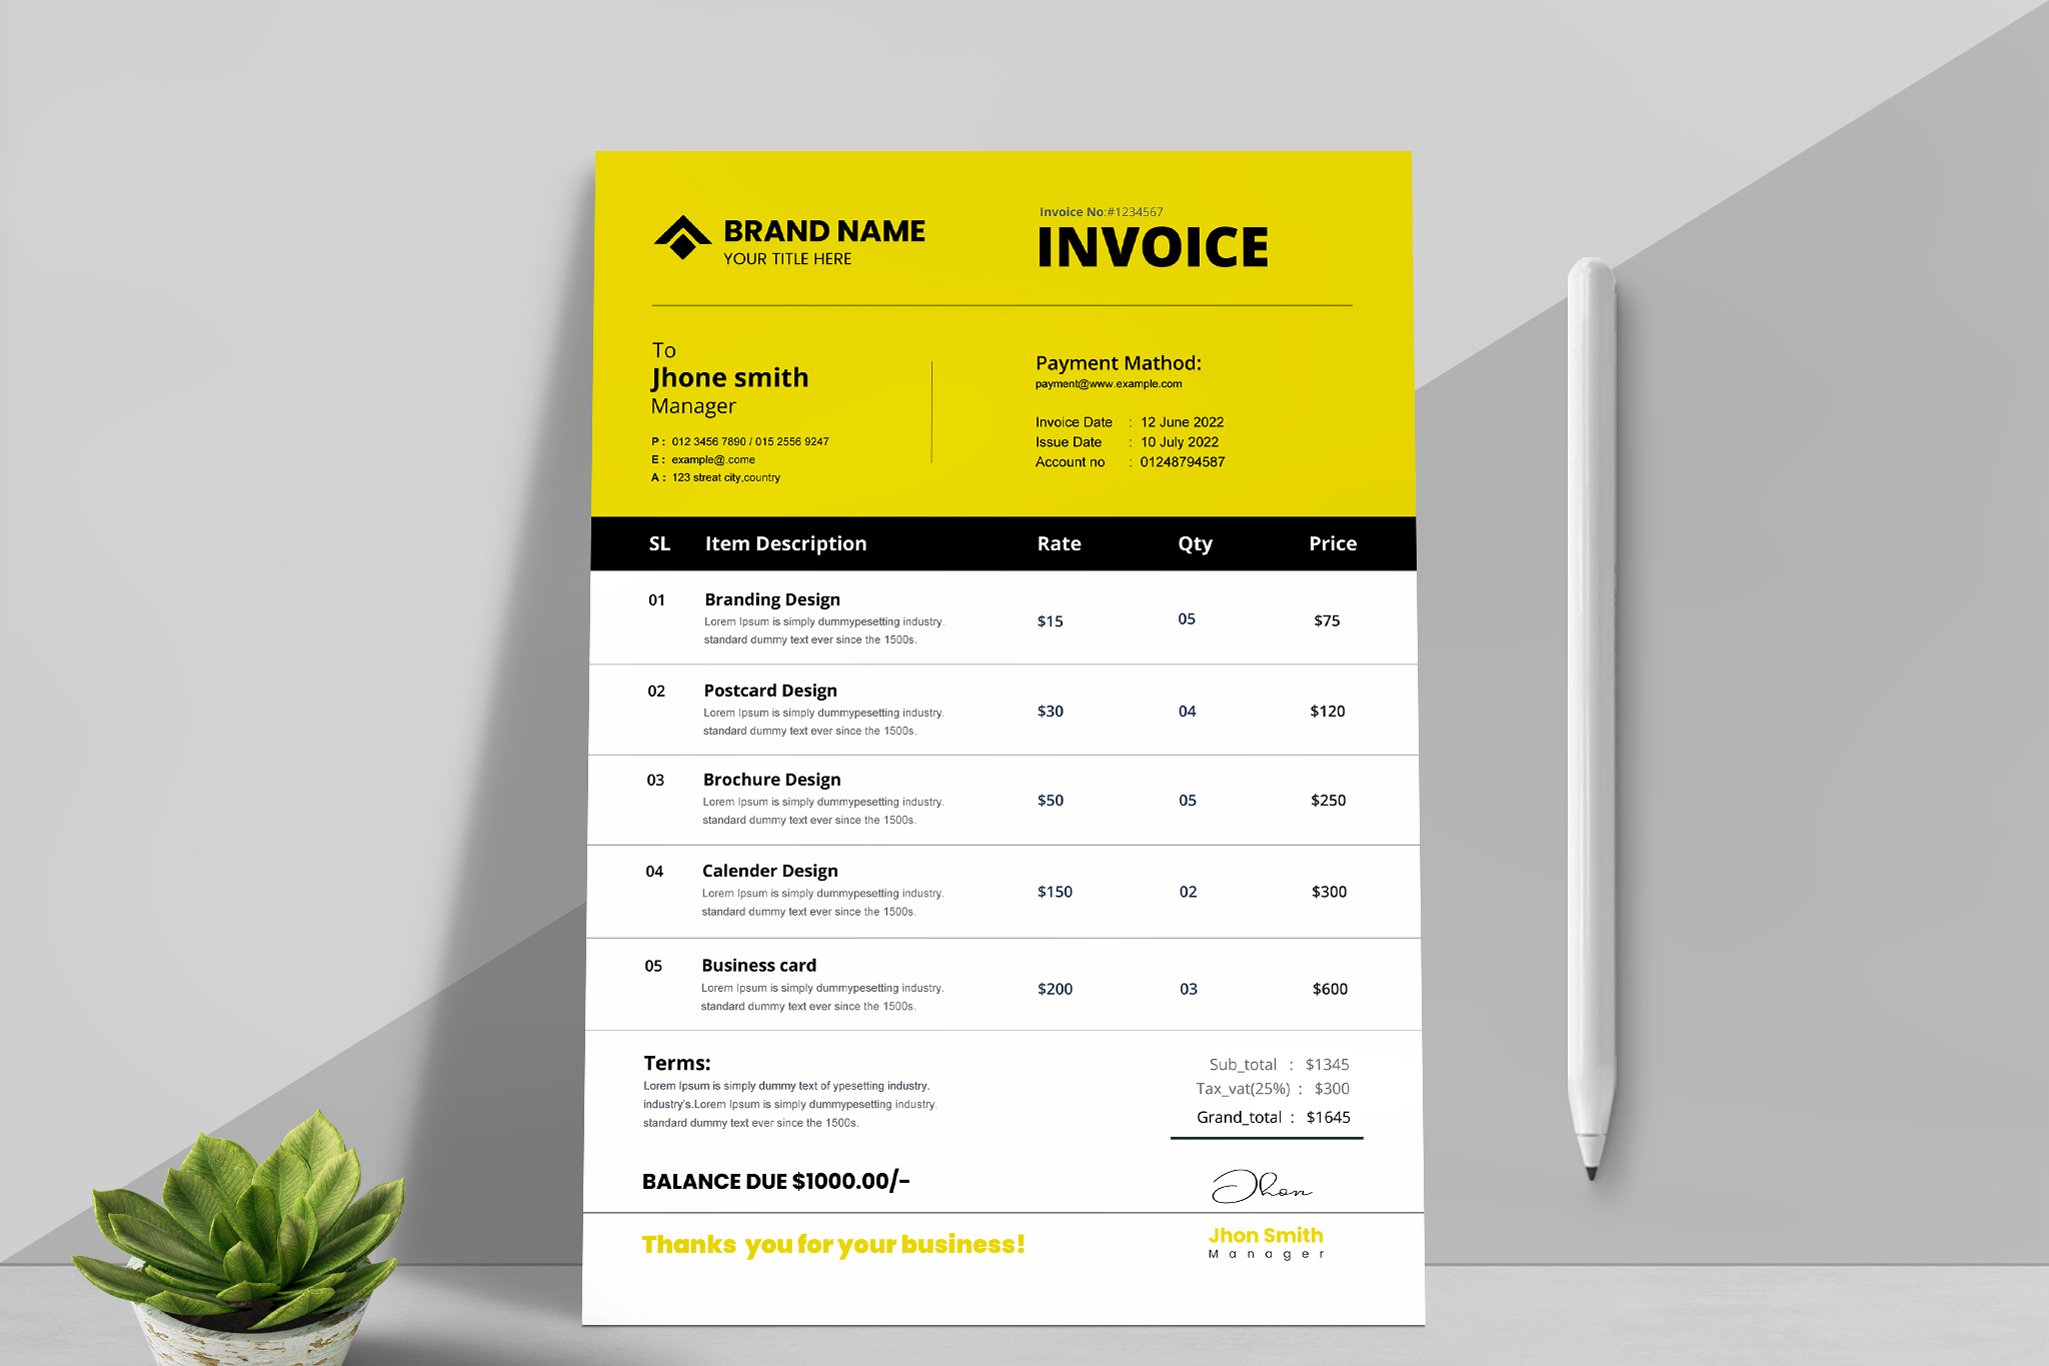 Invoice Template cover image.